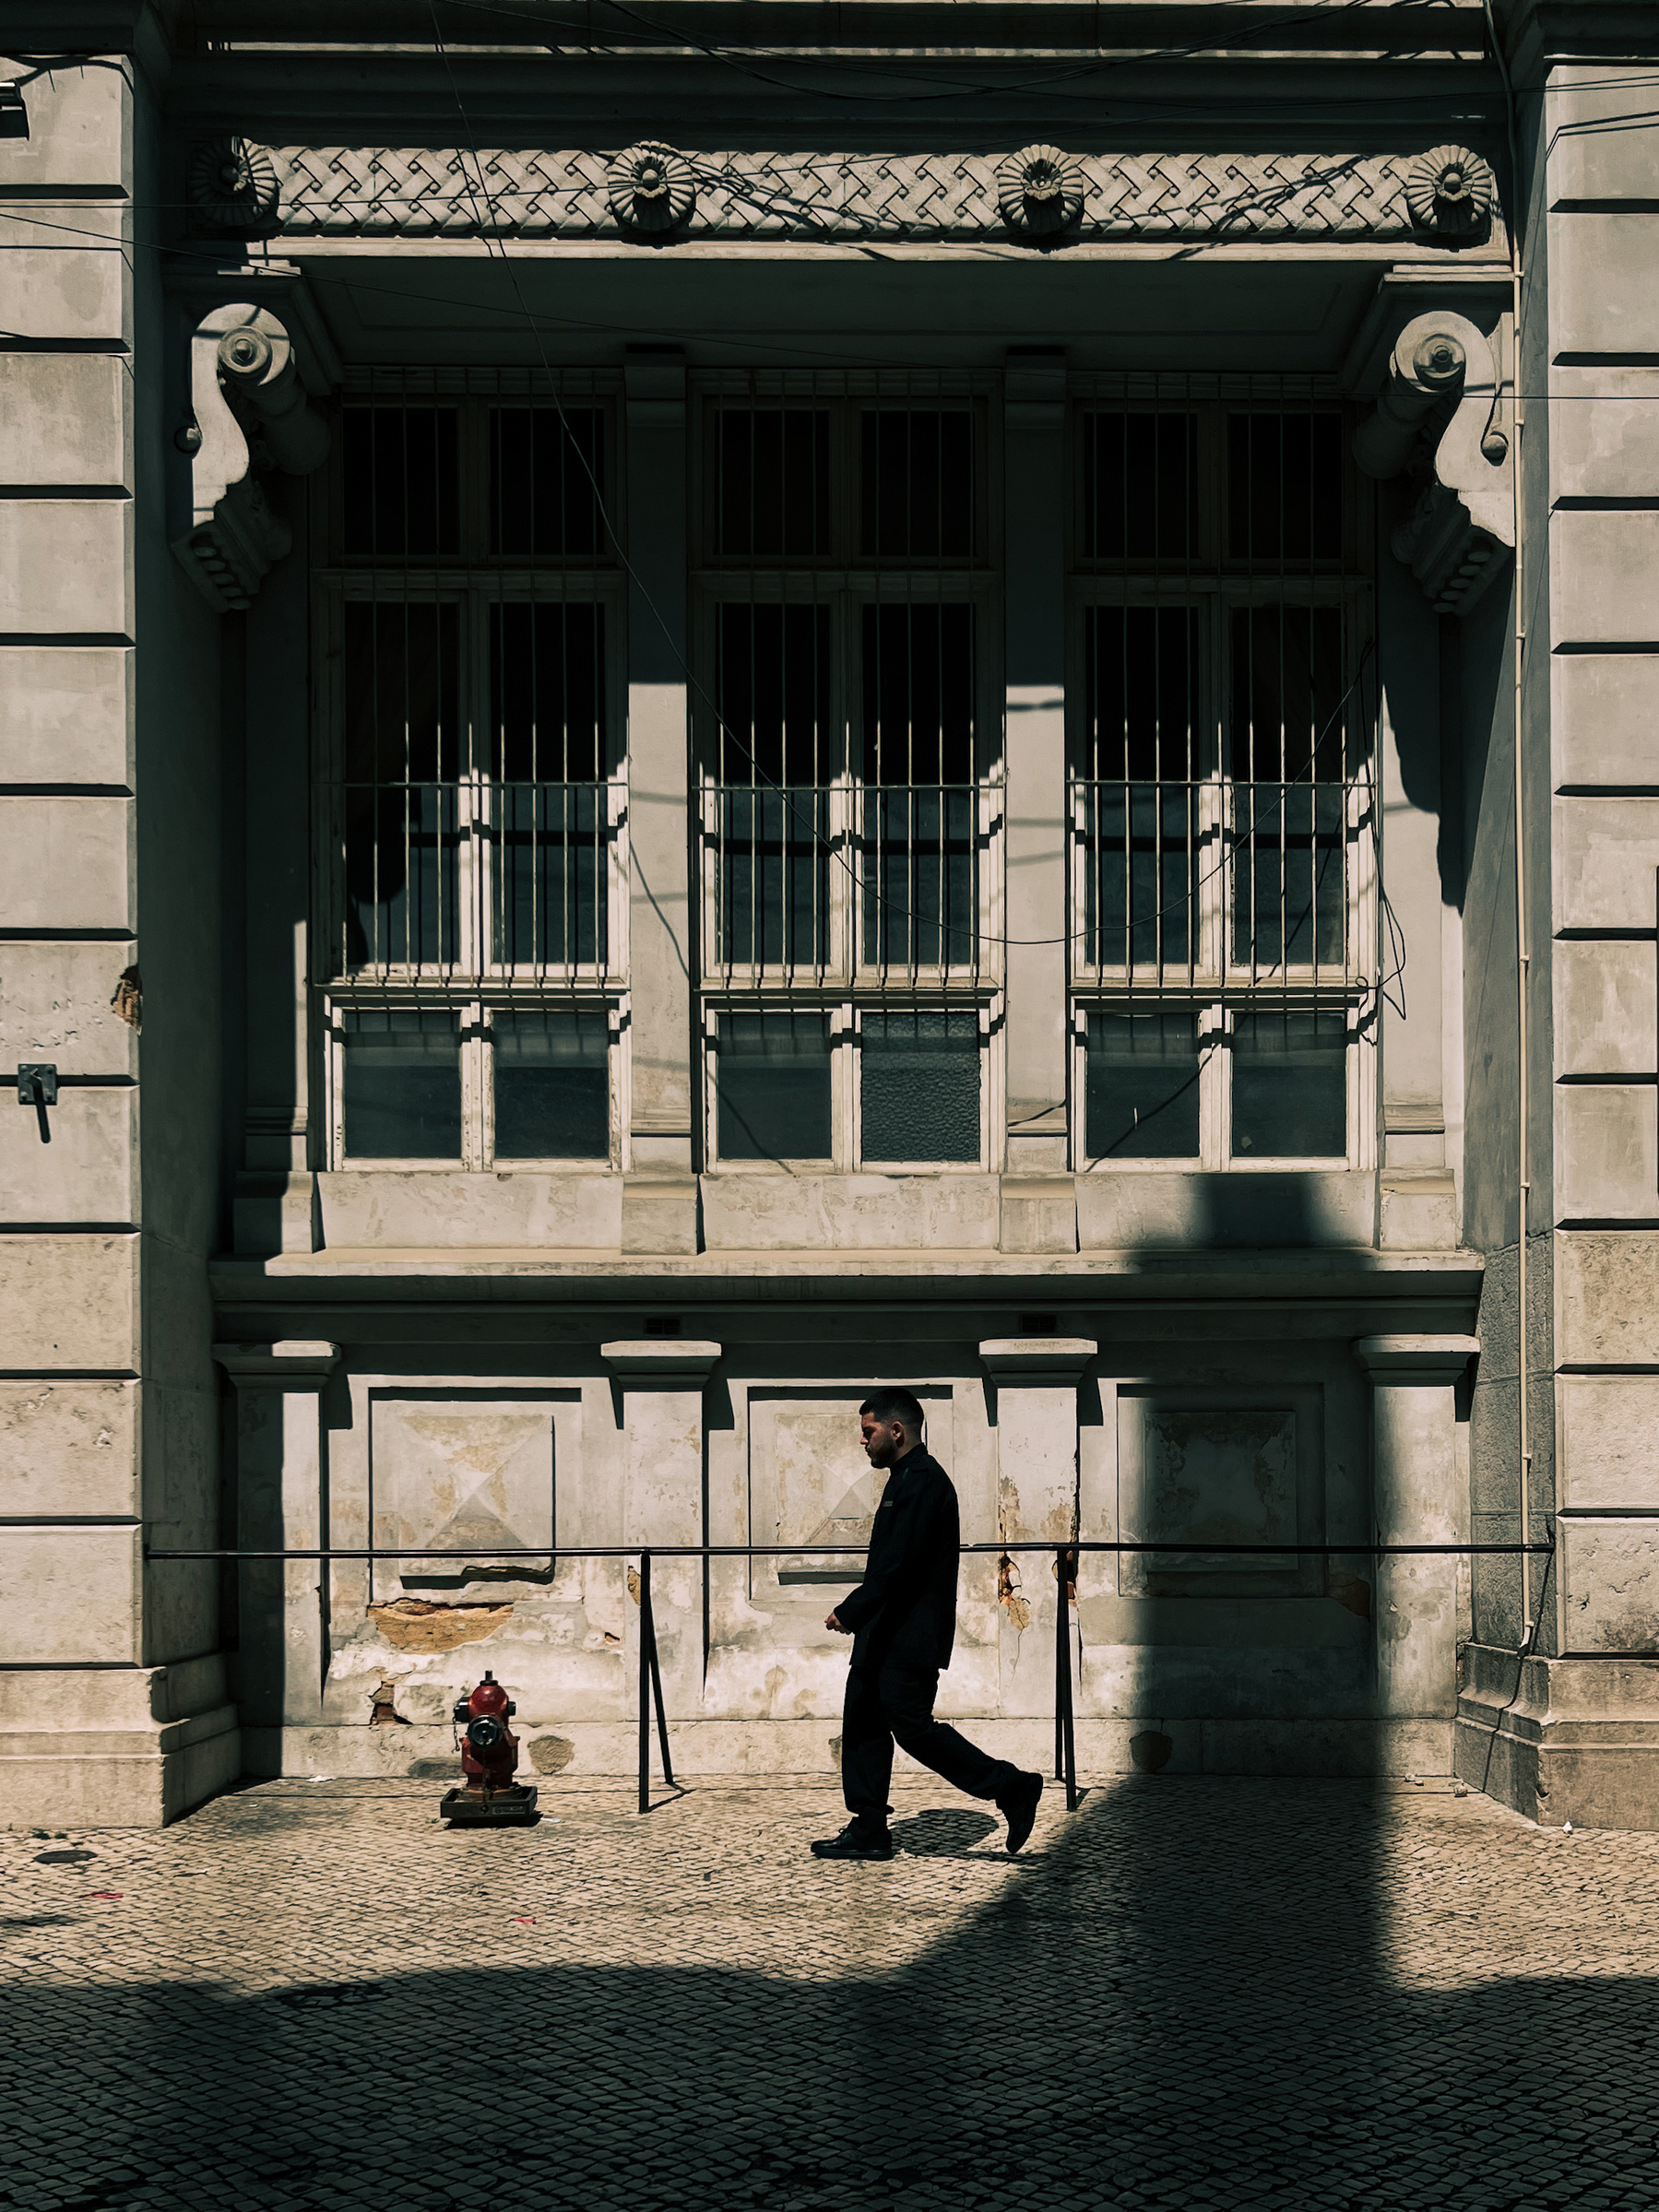 A man walks by a classic building.